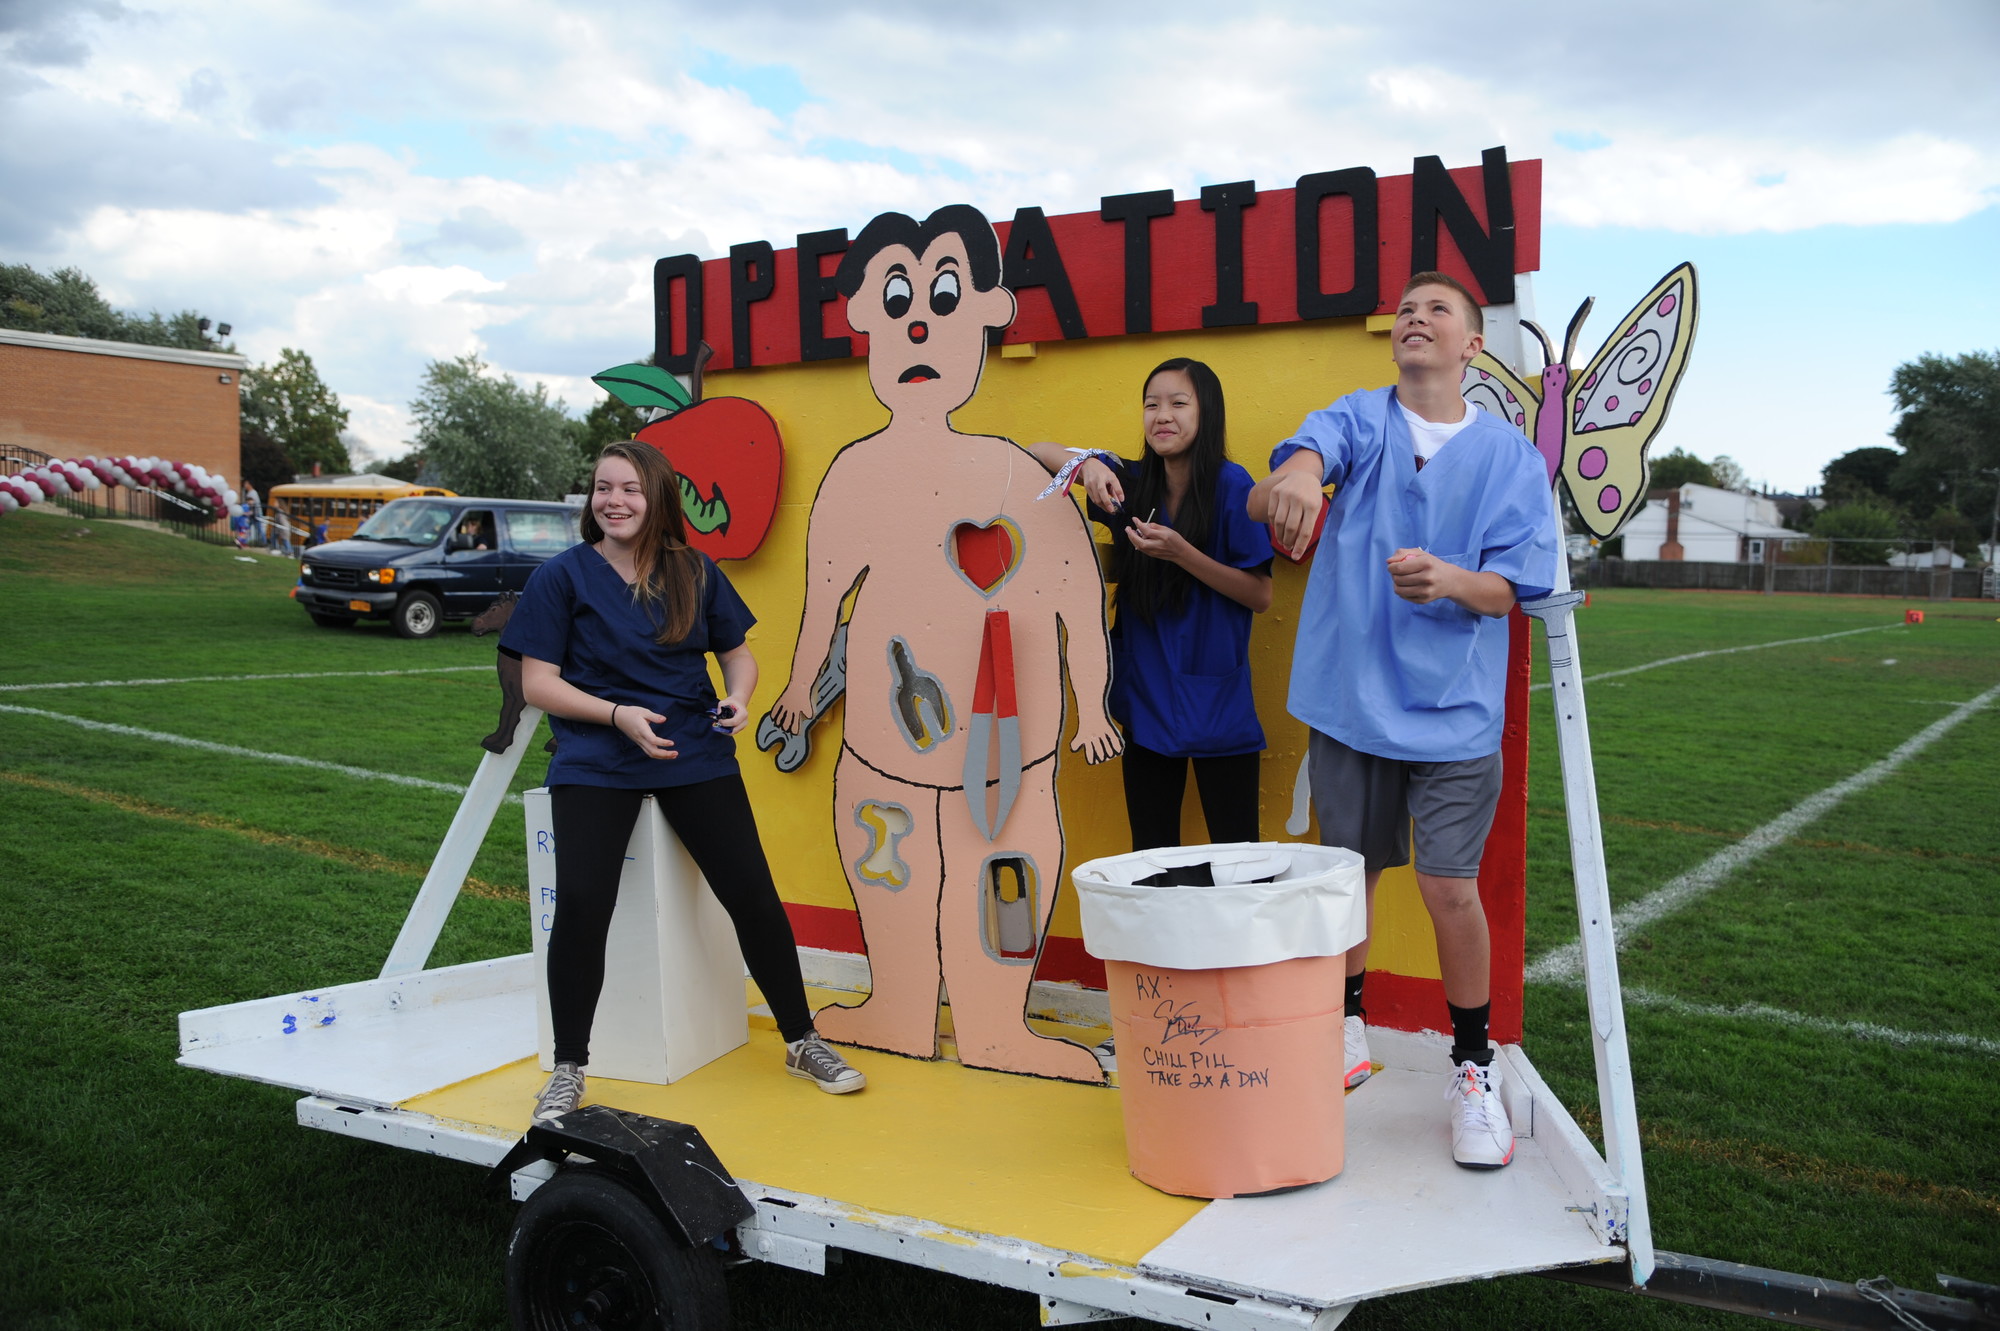 The freshman class crafted an Operation float with surgical precision.